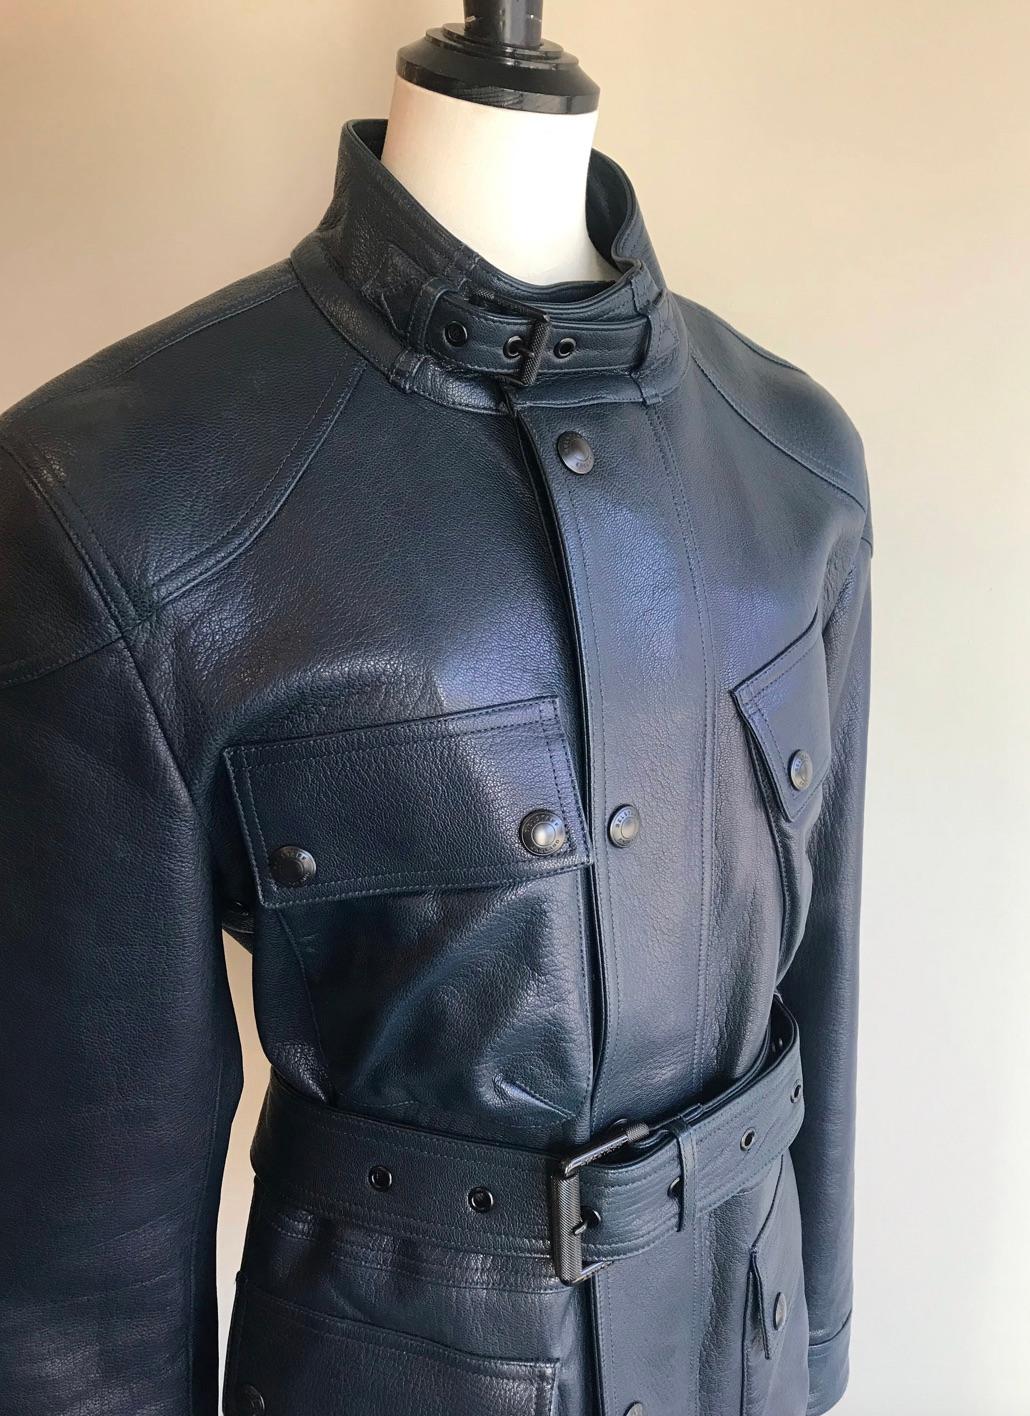 Belstaff Trialmaster Leather Jacket In Excellent Condition For Sale In Glasgow, GB